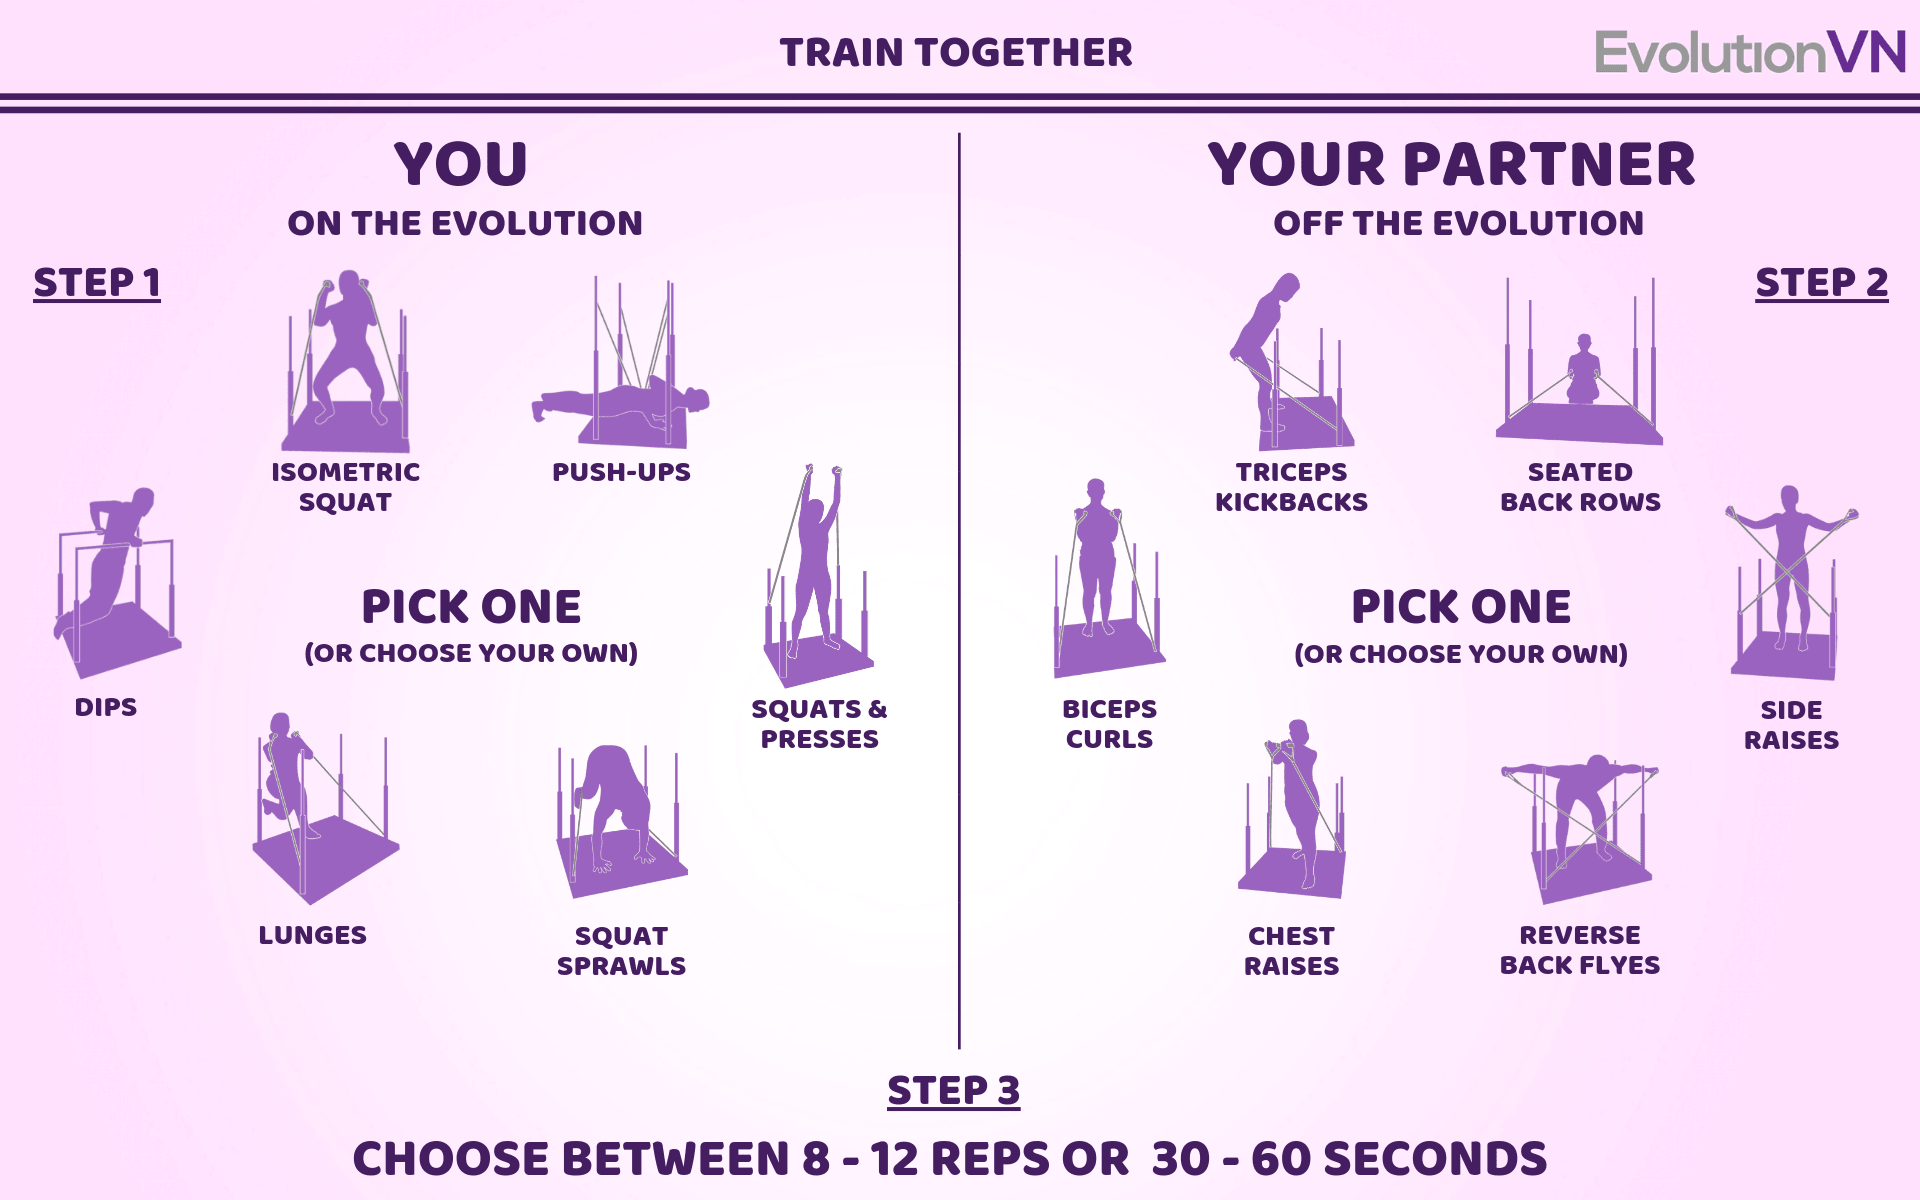 Partner exercises are easy to create - as long as one of you is on the Evolution, you can combine almost any two exercises